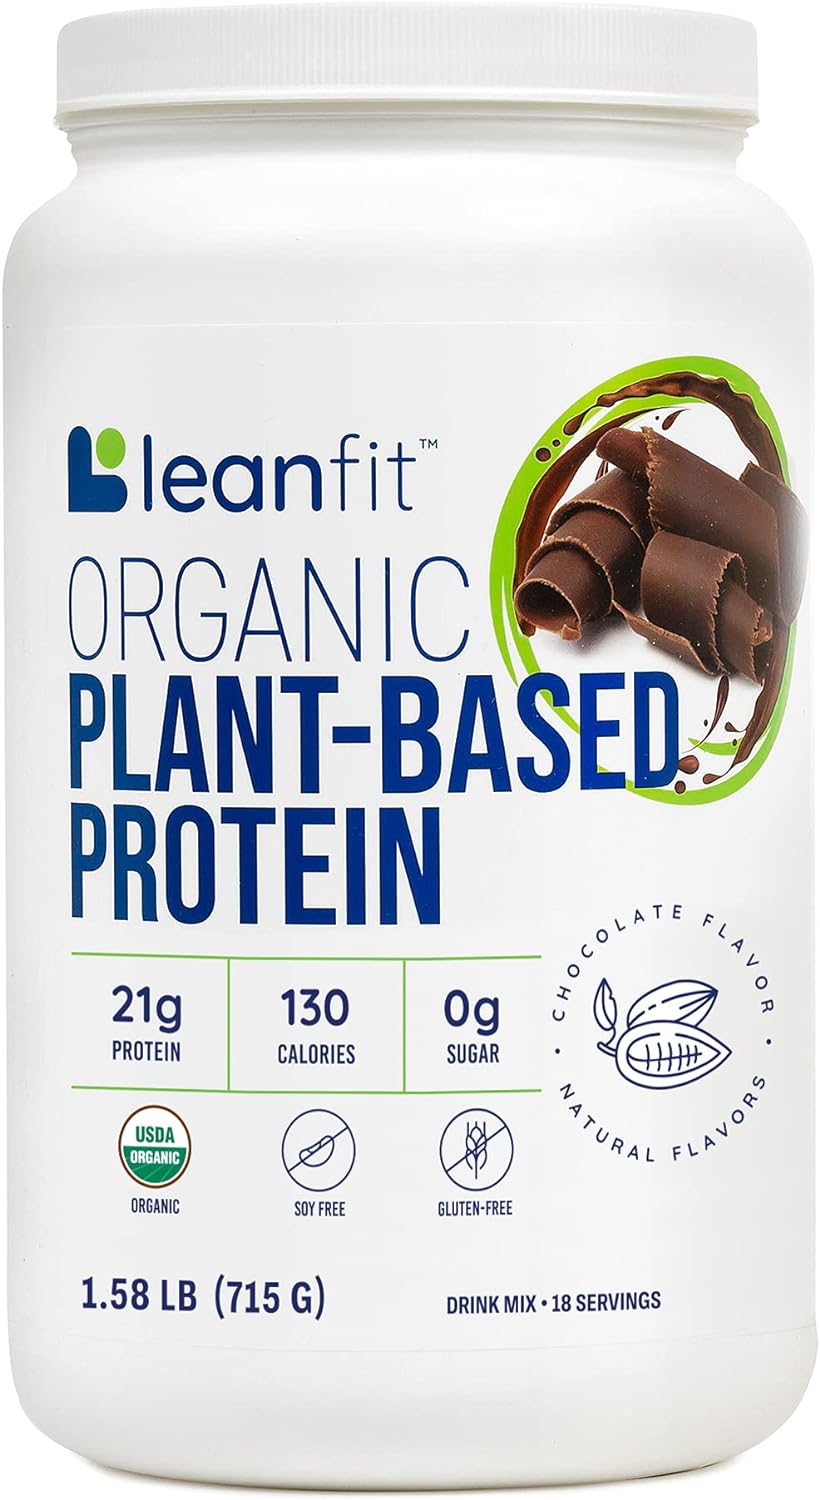 LeanFit, Organic Plant-Based Protein, Natural Chocolate, 21g Protein,